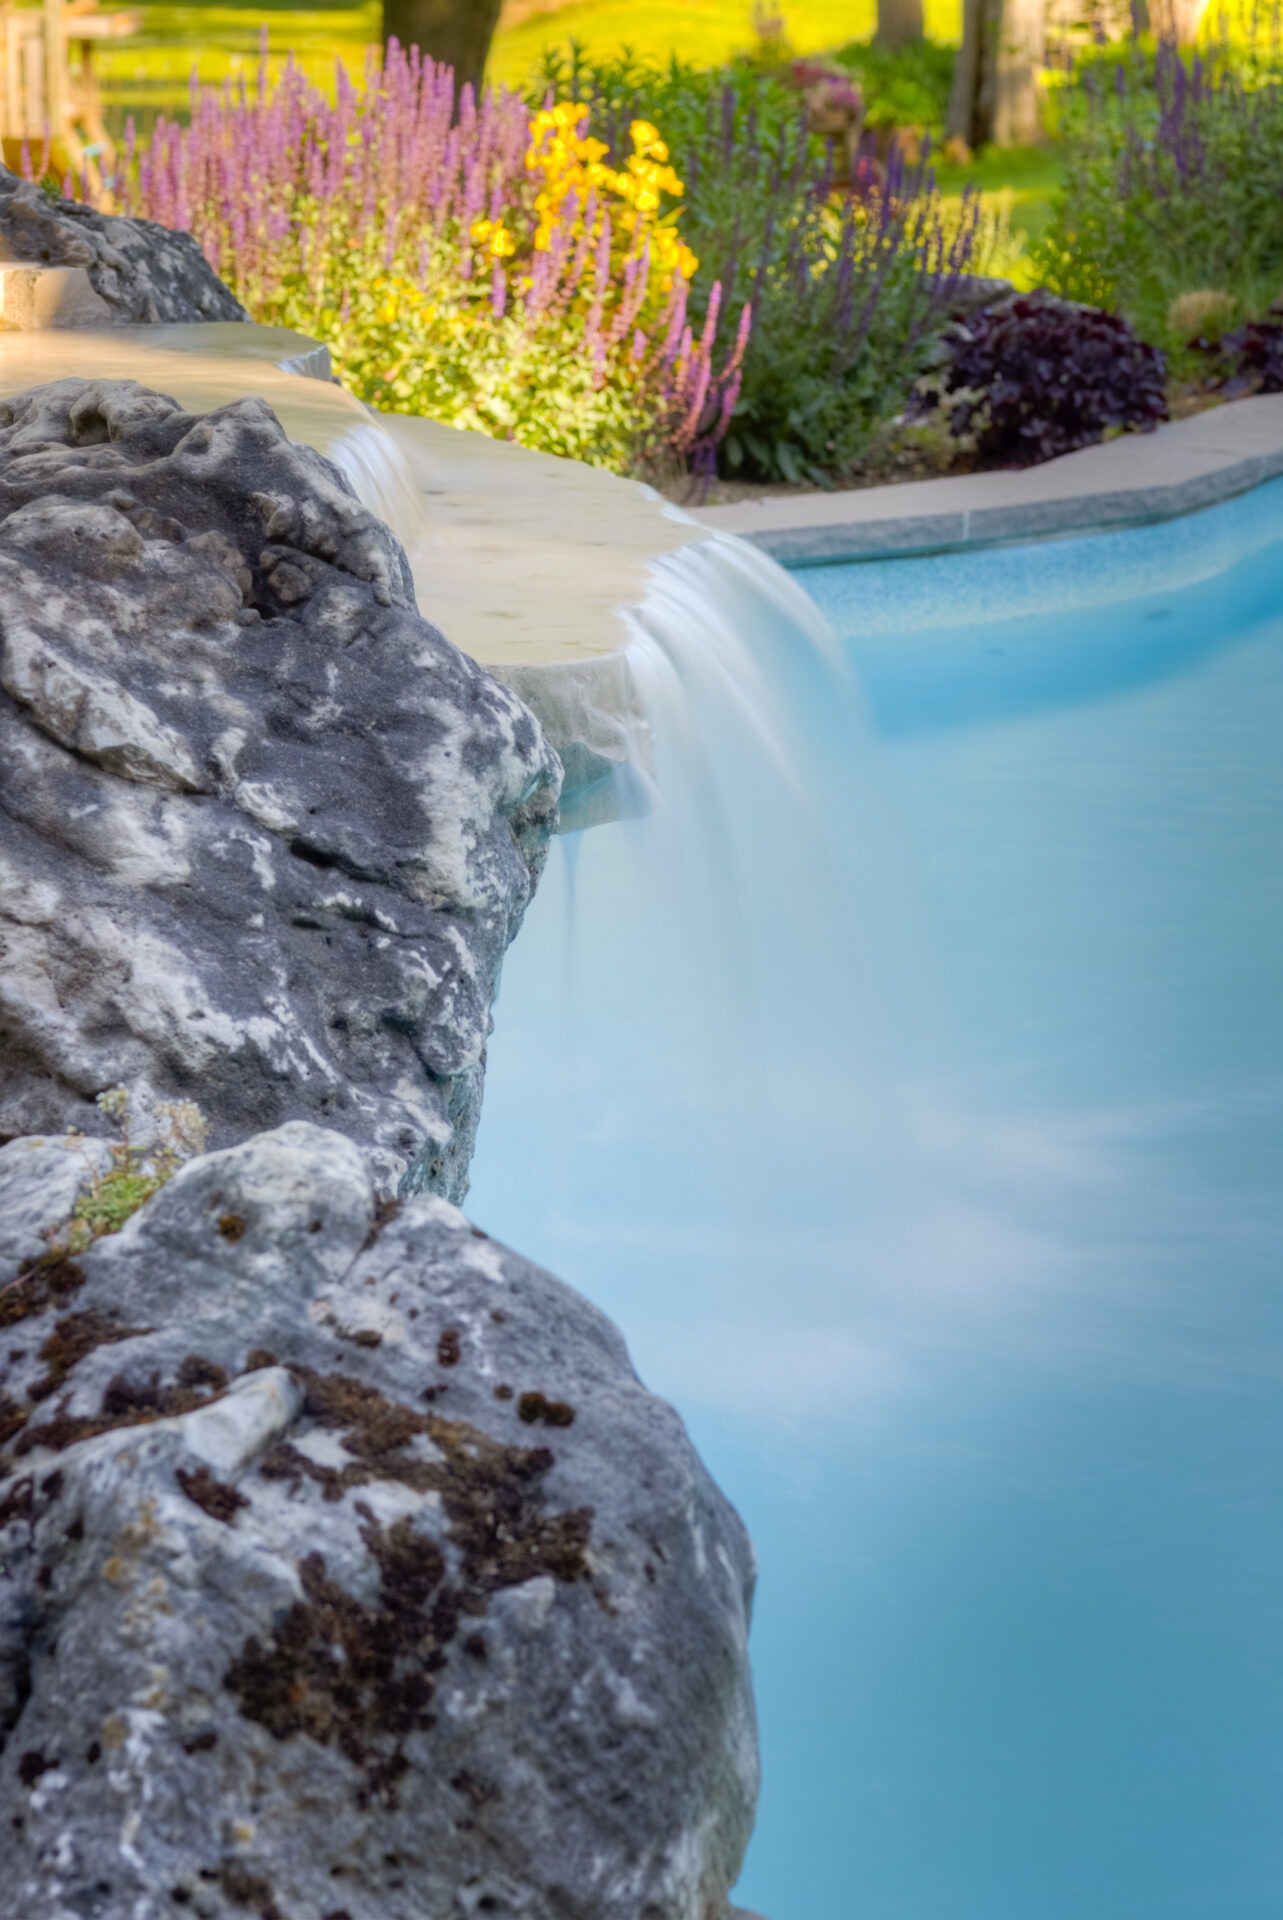 A tranquil waterfall cascades over rocks into a serene pool, surrounded by vibrant flowering plants and lush greenery in a landscaped garden.